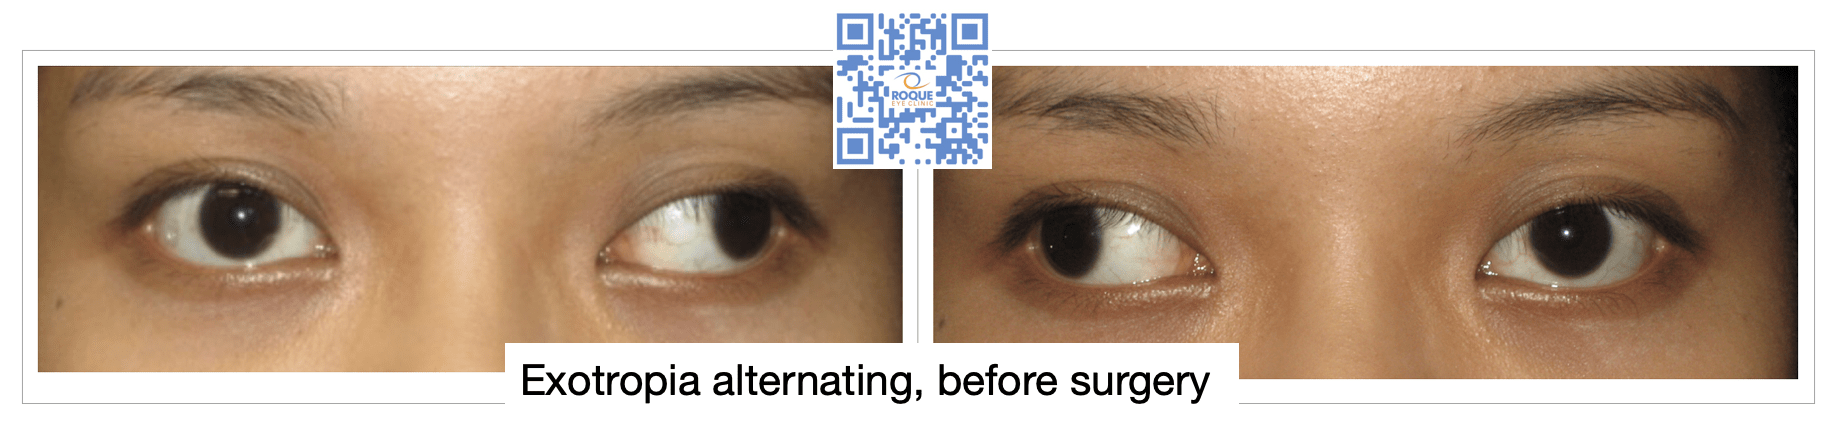 STRABISMUS SURGERY - ROQUE Eye Clinic 